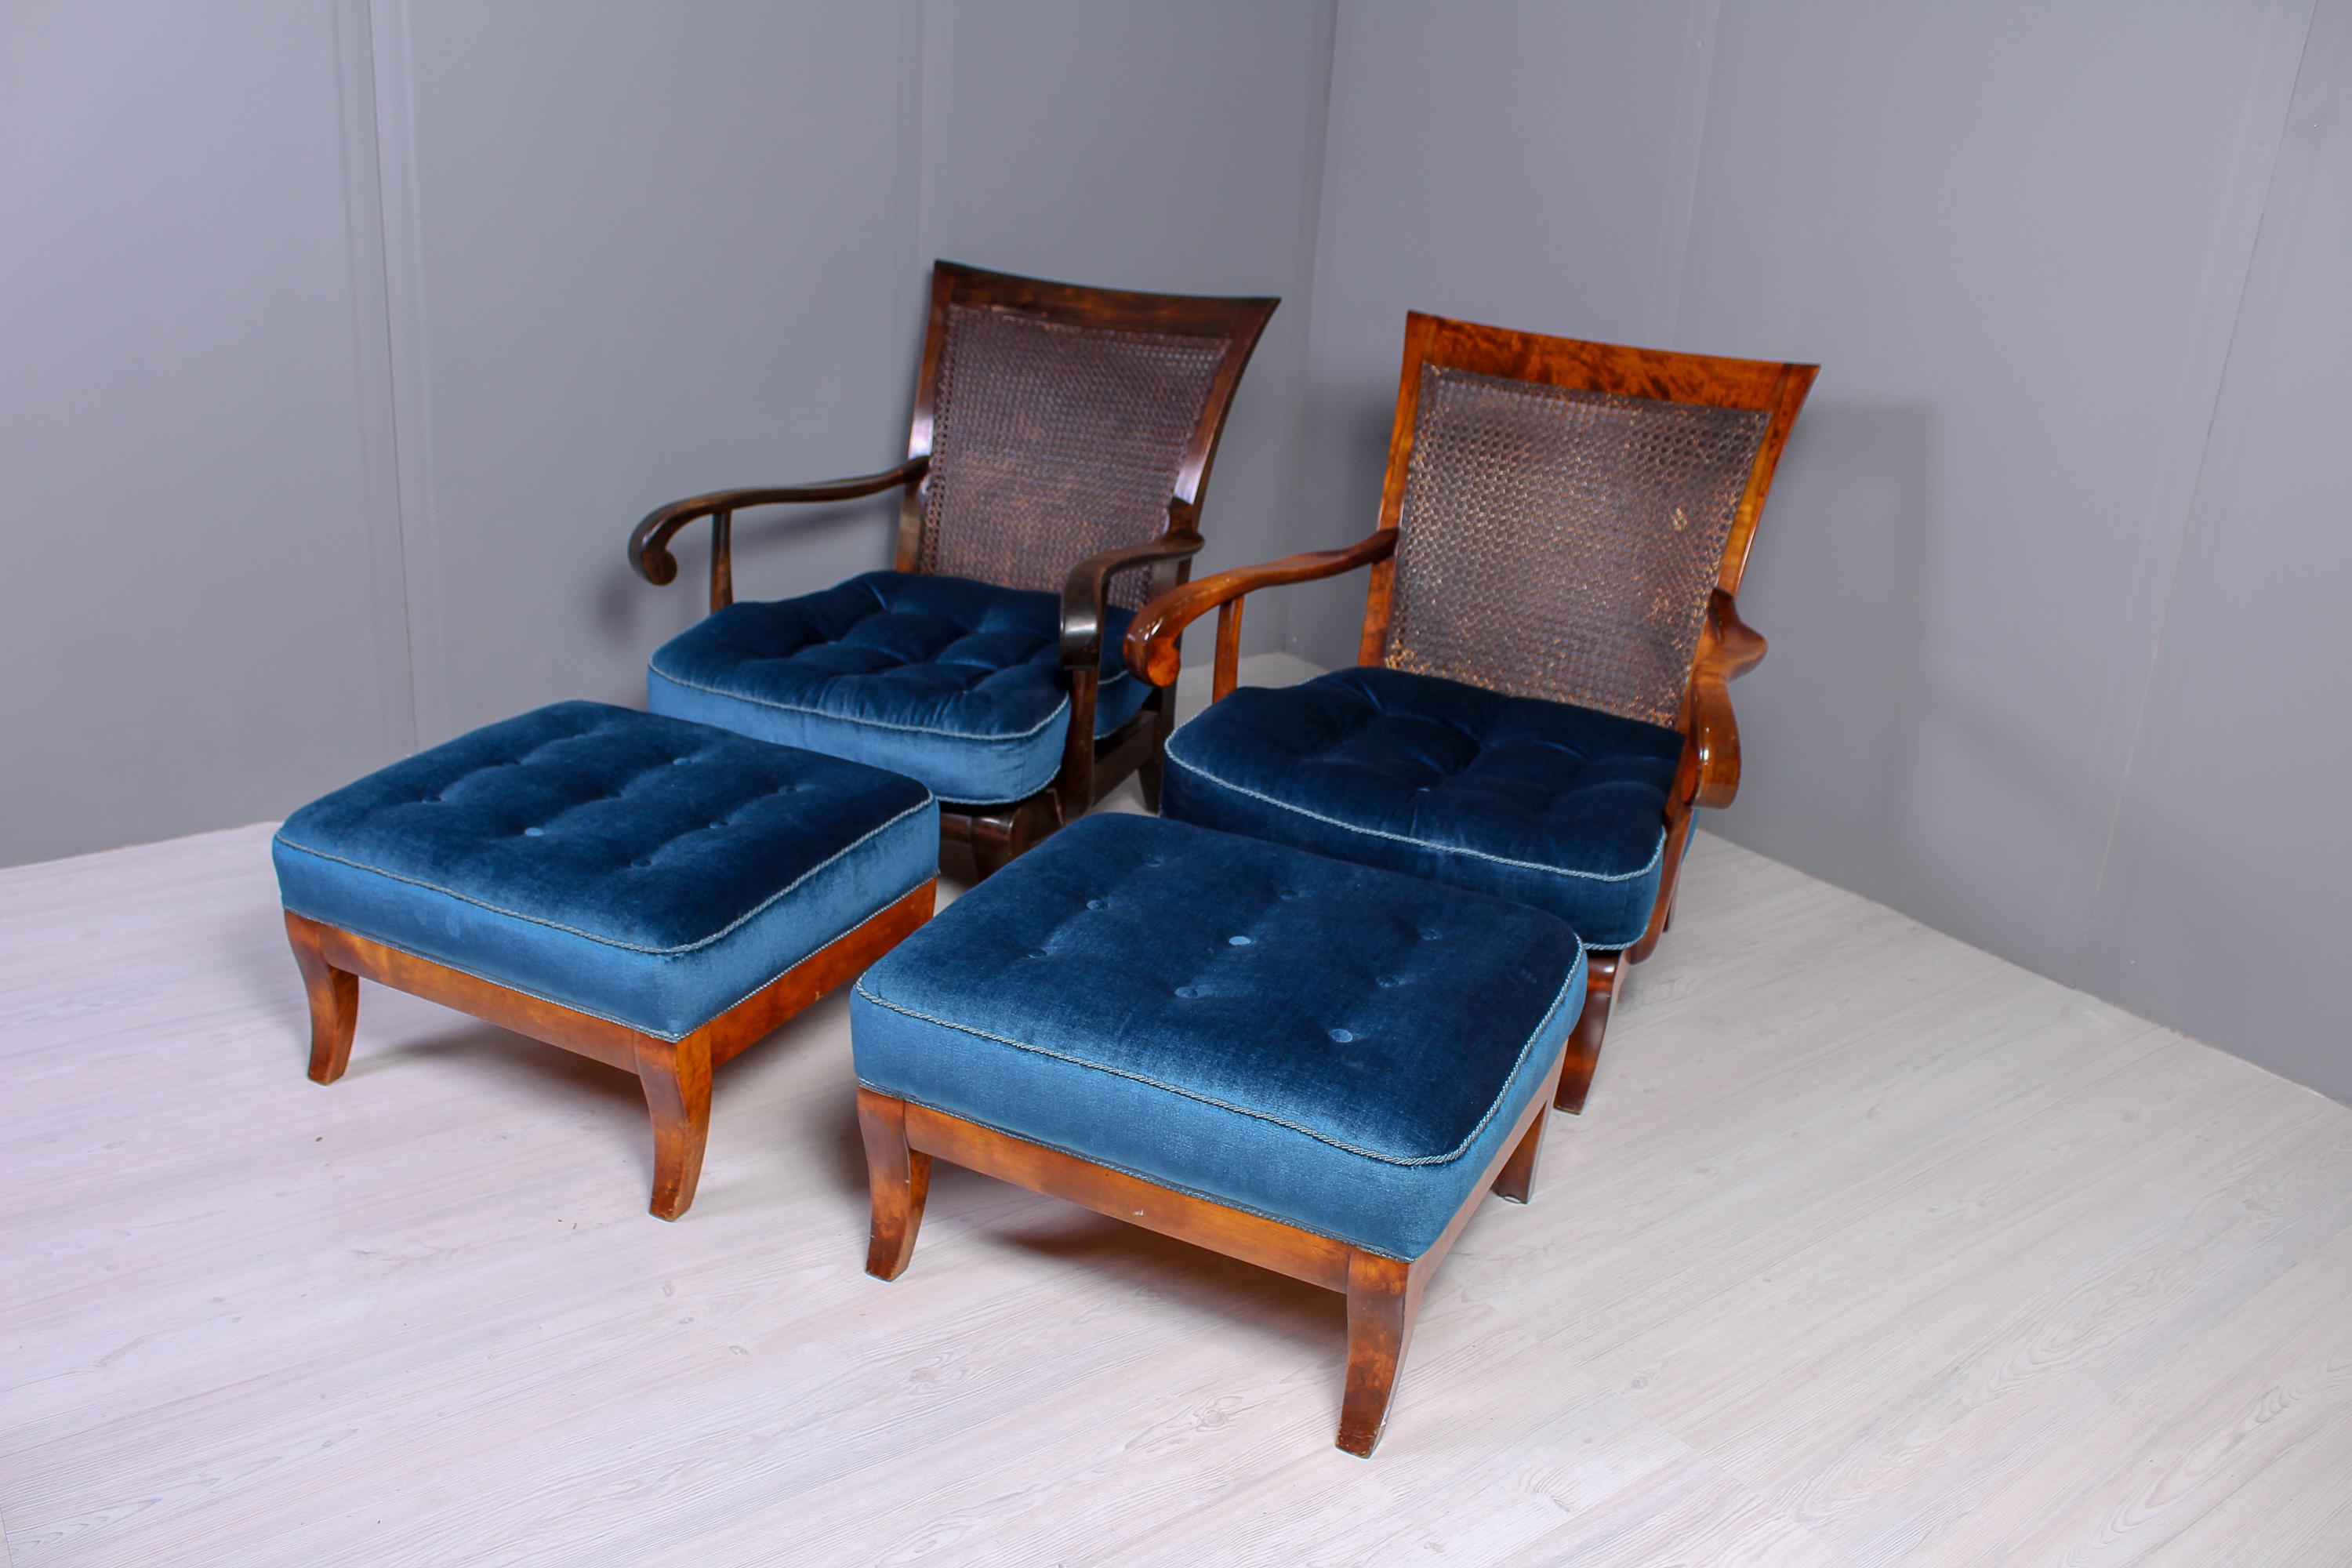 A great set of lounge chairs and ottomans made in Scandinavia in the 1940s. The chairs are elegantly designed with rattan backs and nice curves. Chairs and ottomans are upholstered in a high quality blue velvet fabric which is in excellent vintage